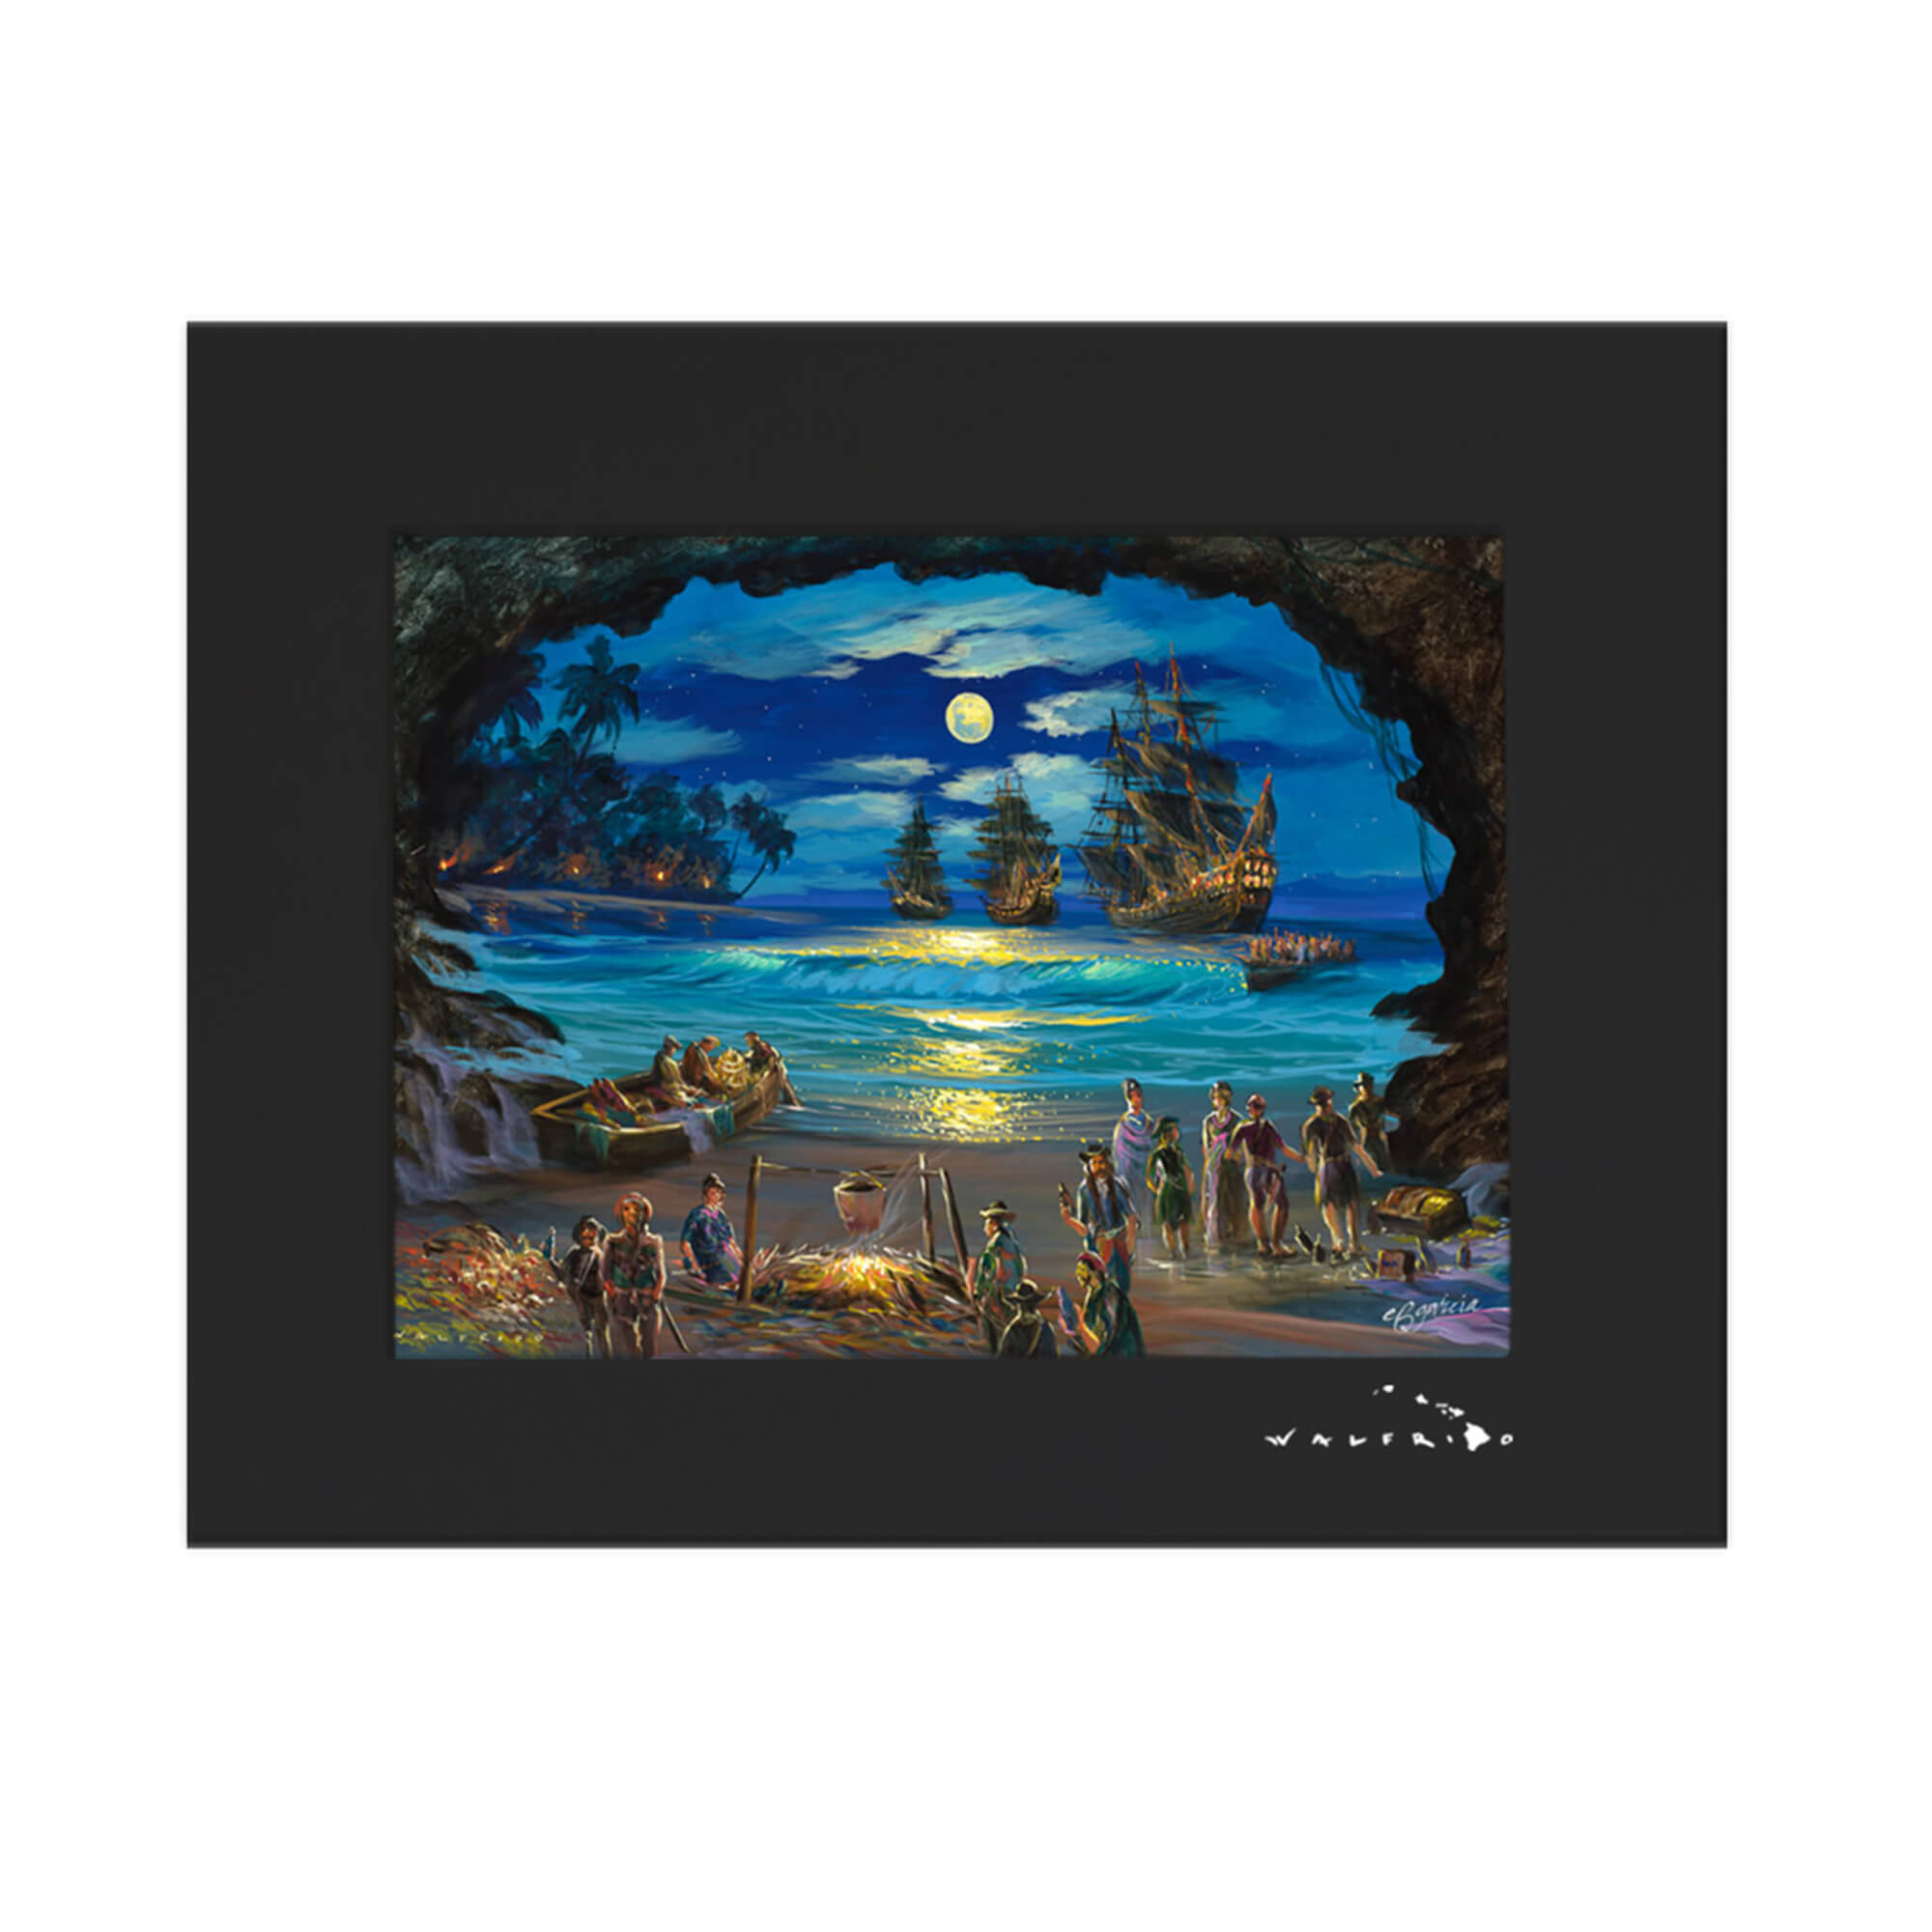 A matted art print featuring a cave framing merchants and vintage ships coming to the shores of Hawaii at night by Hawaii artist Walfrido Garcia